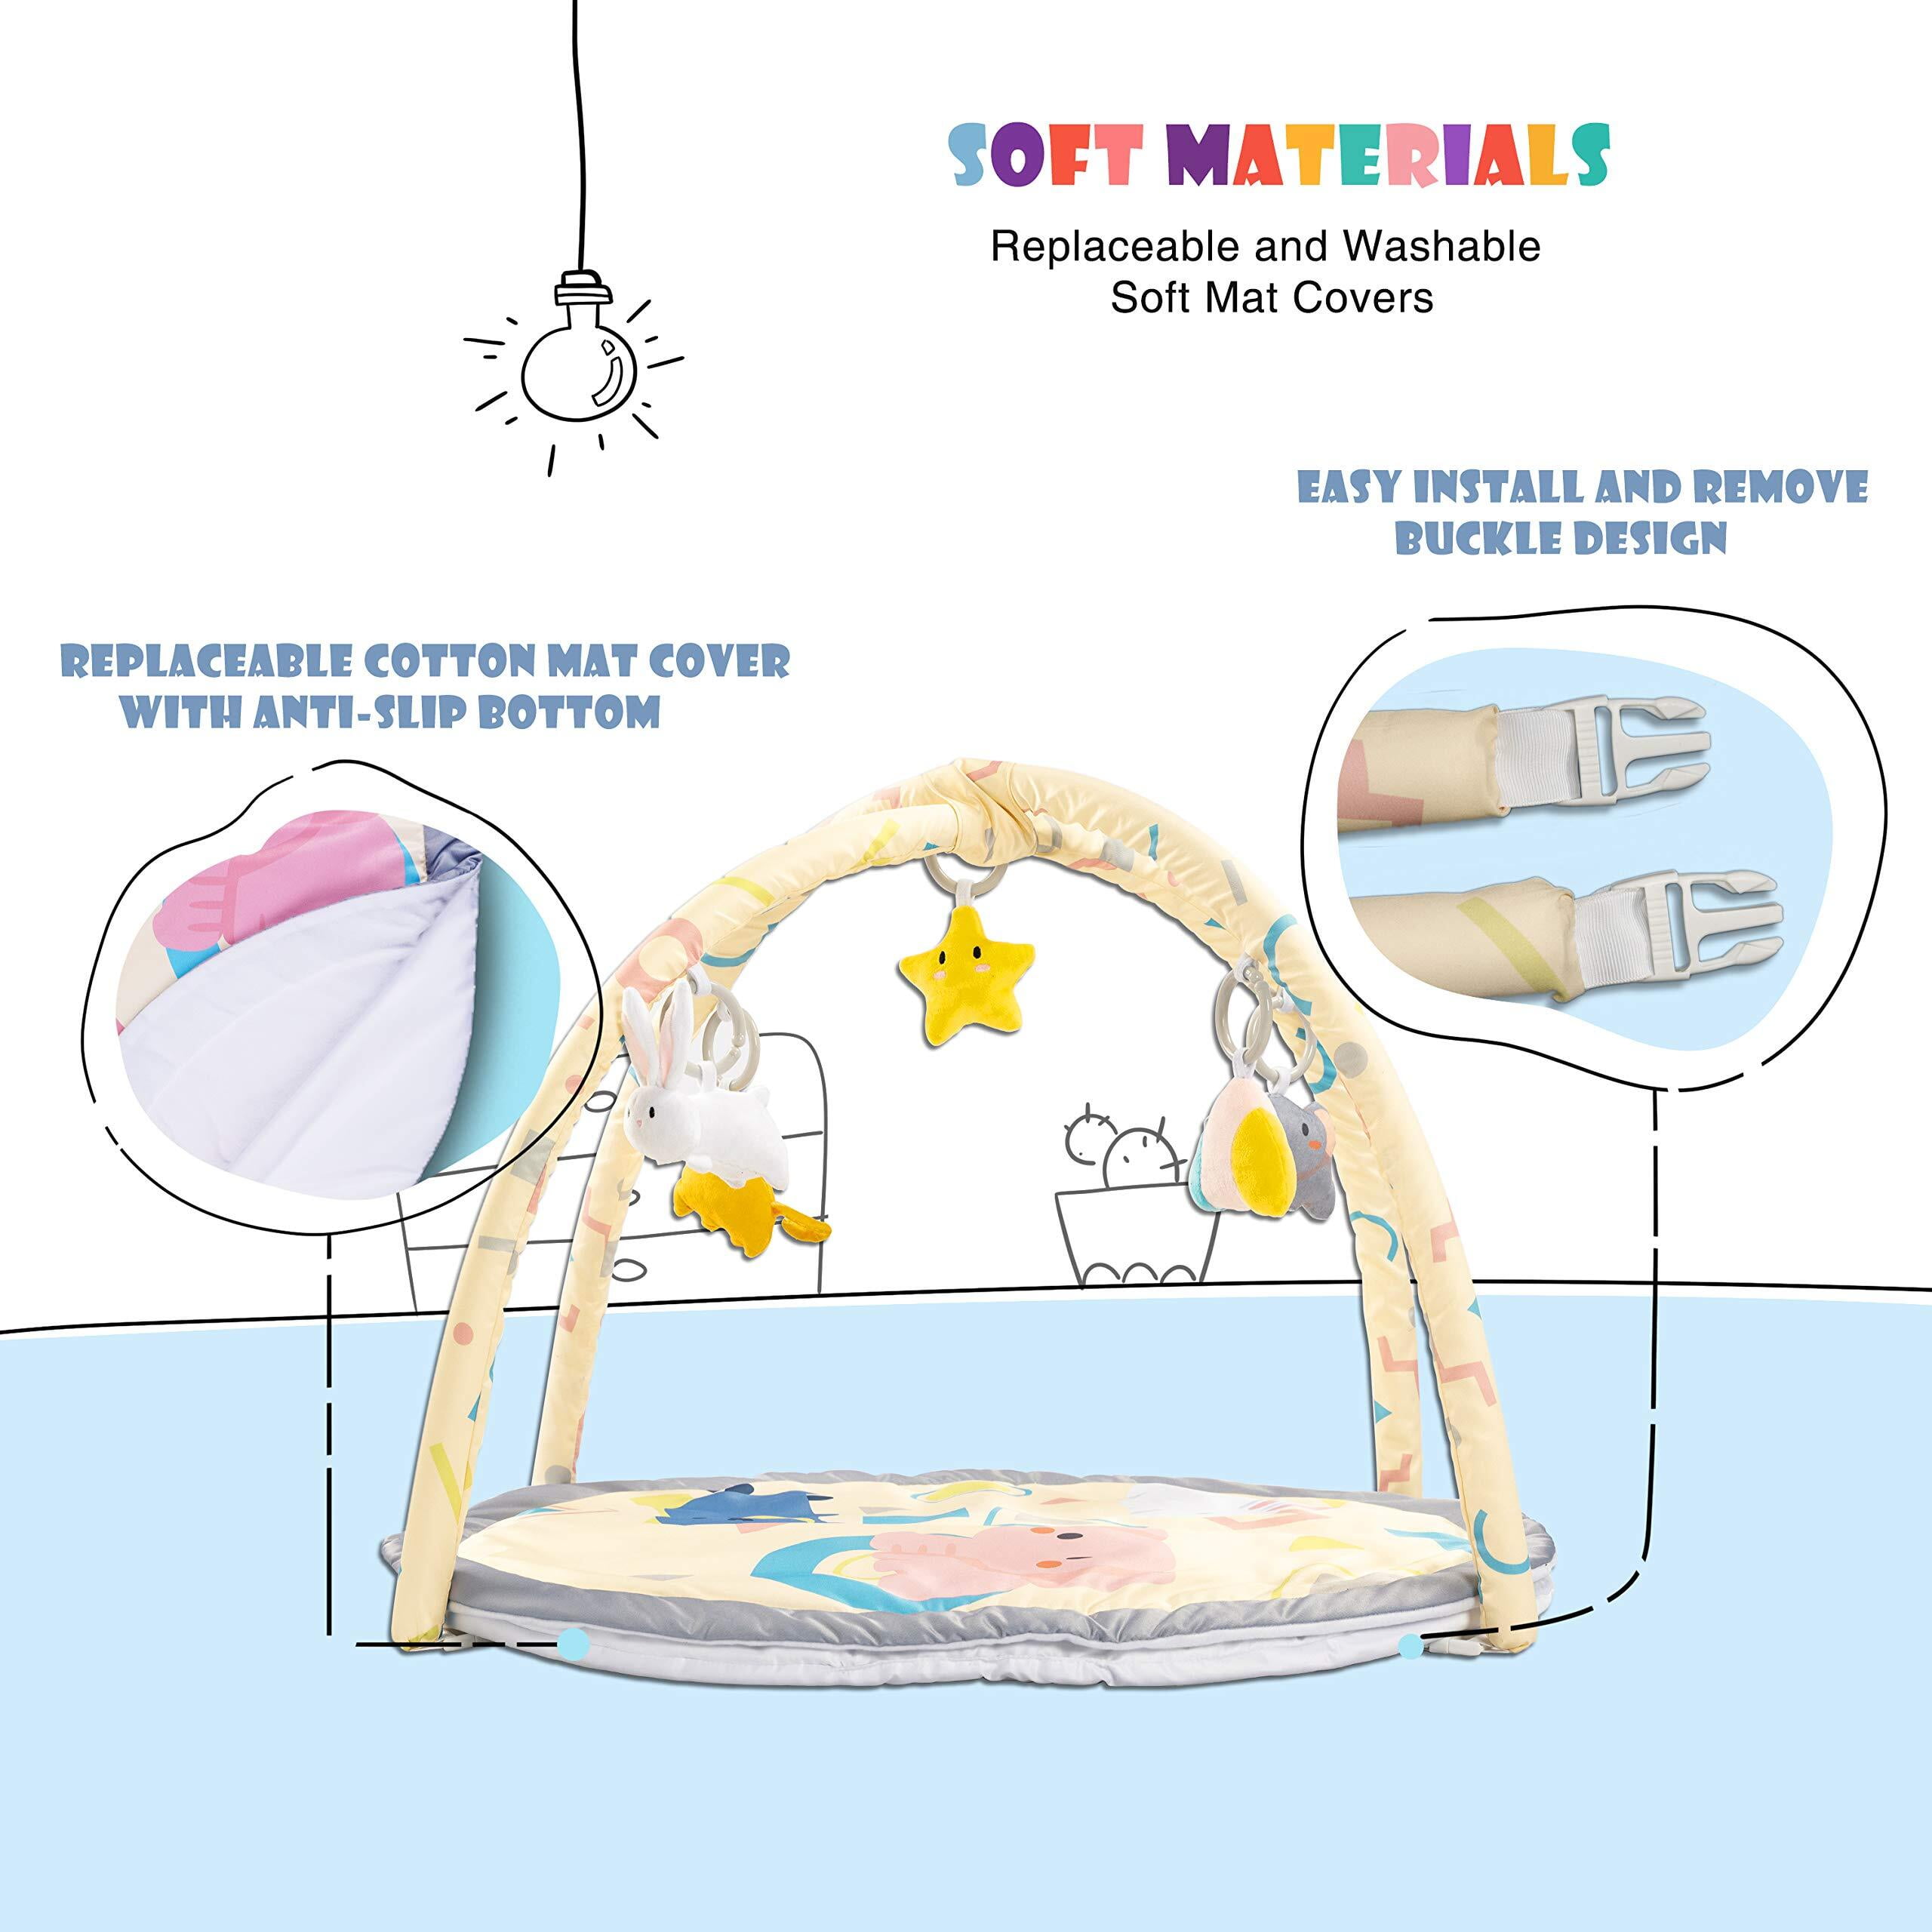 Cat Play Mat With Hanging Toys Activity Center For Bored Cats - CatMEGA  Store